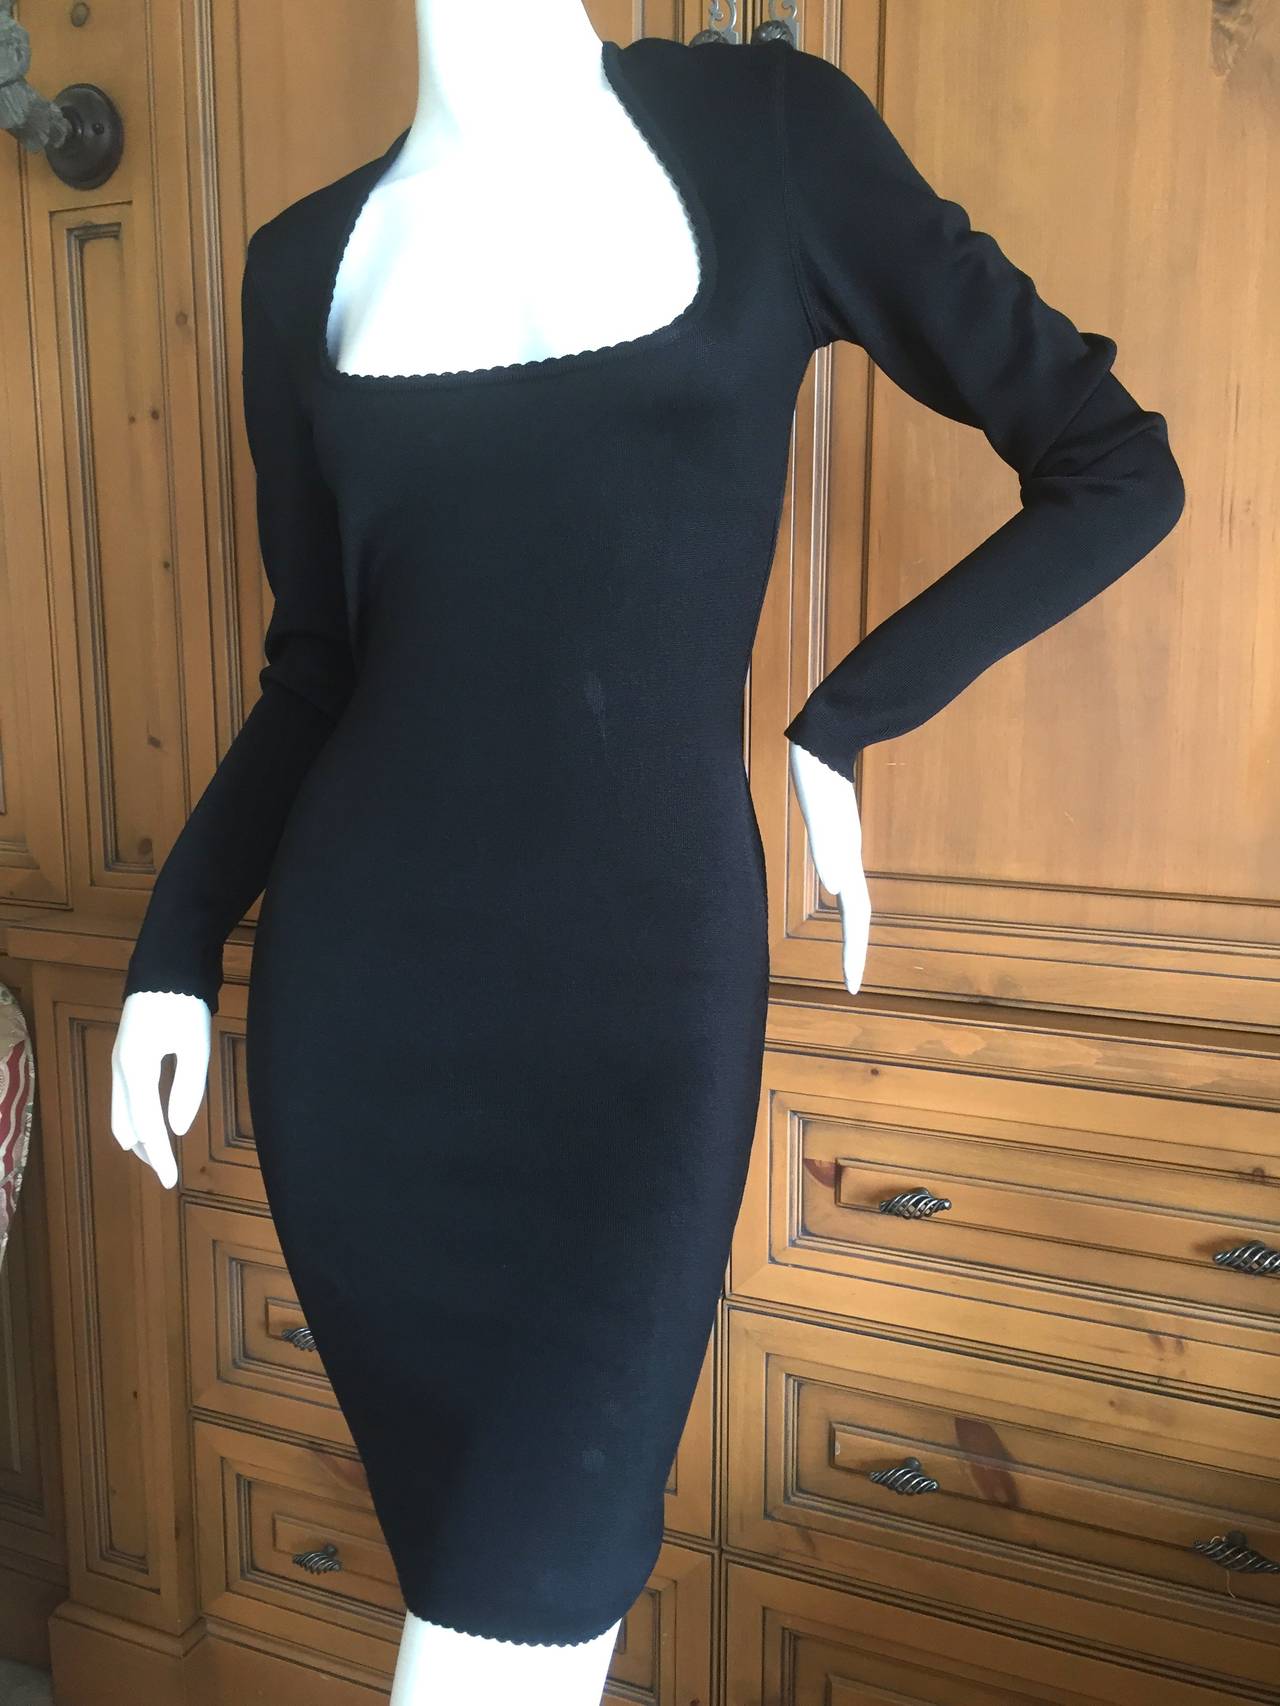 Azzedine Alaia Iconic 1980's Low Cut Little Black Mini Dress
This is the frontpiece in Alaia Book
Sz XS
The measurements in the listing is of the dress lying flat, with out stretching it.
There is a lot of stretch in this, they don't call him